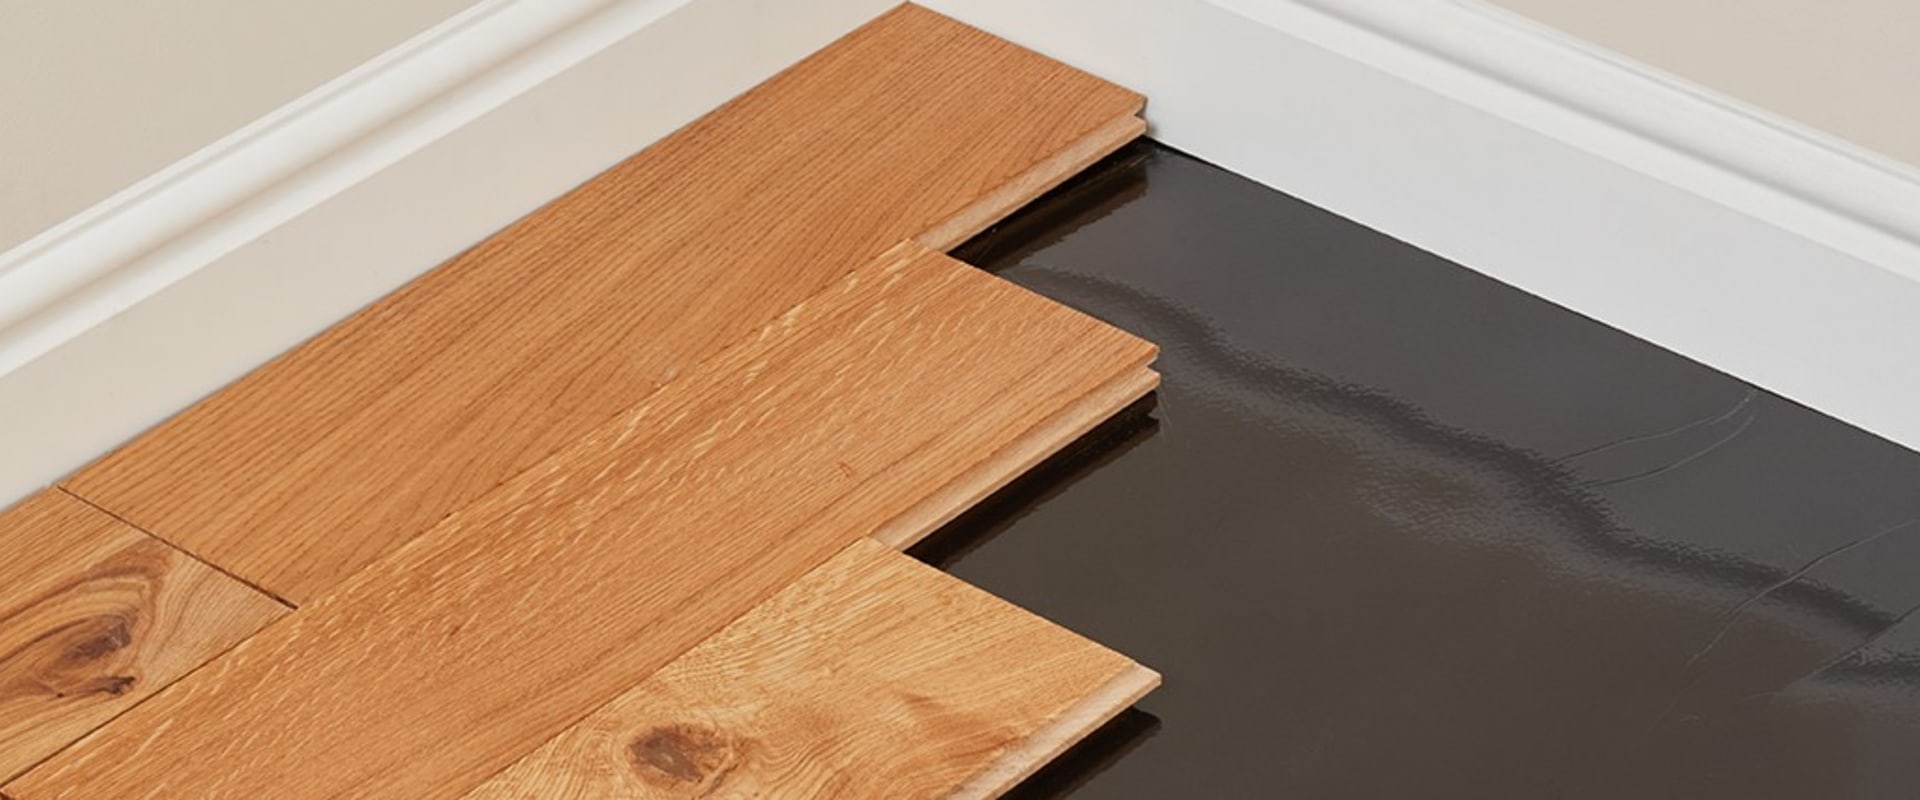 What is the Best Underlay for Laminate Flooring and Underfloor Heating?